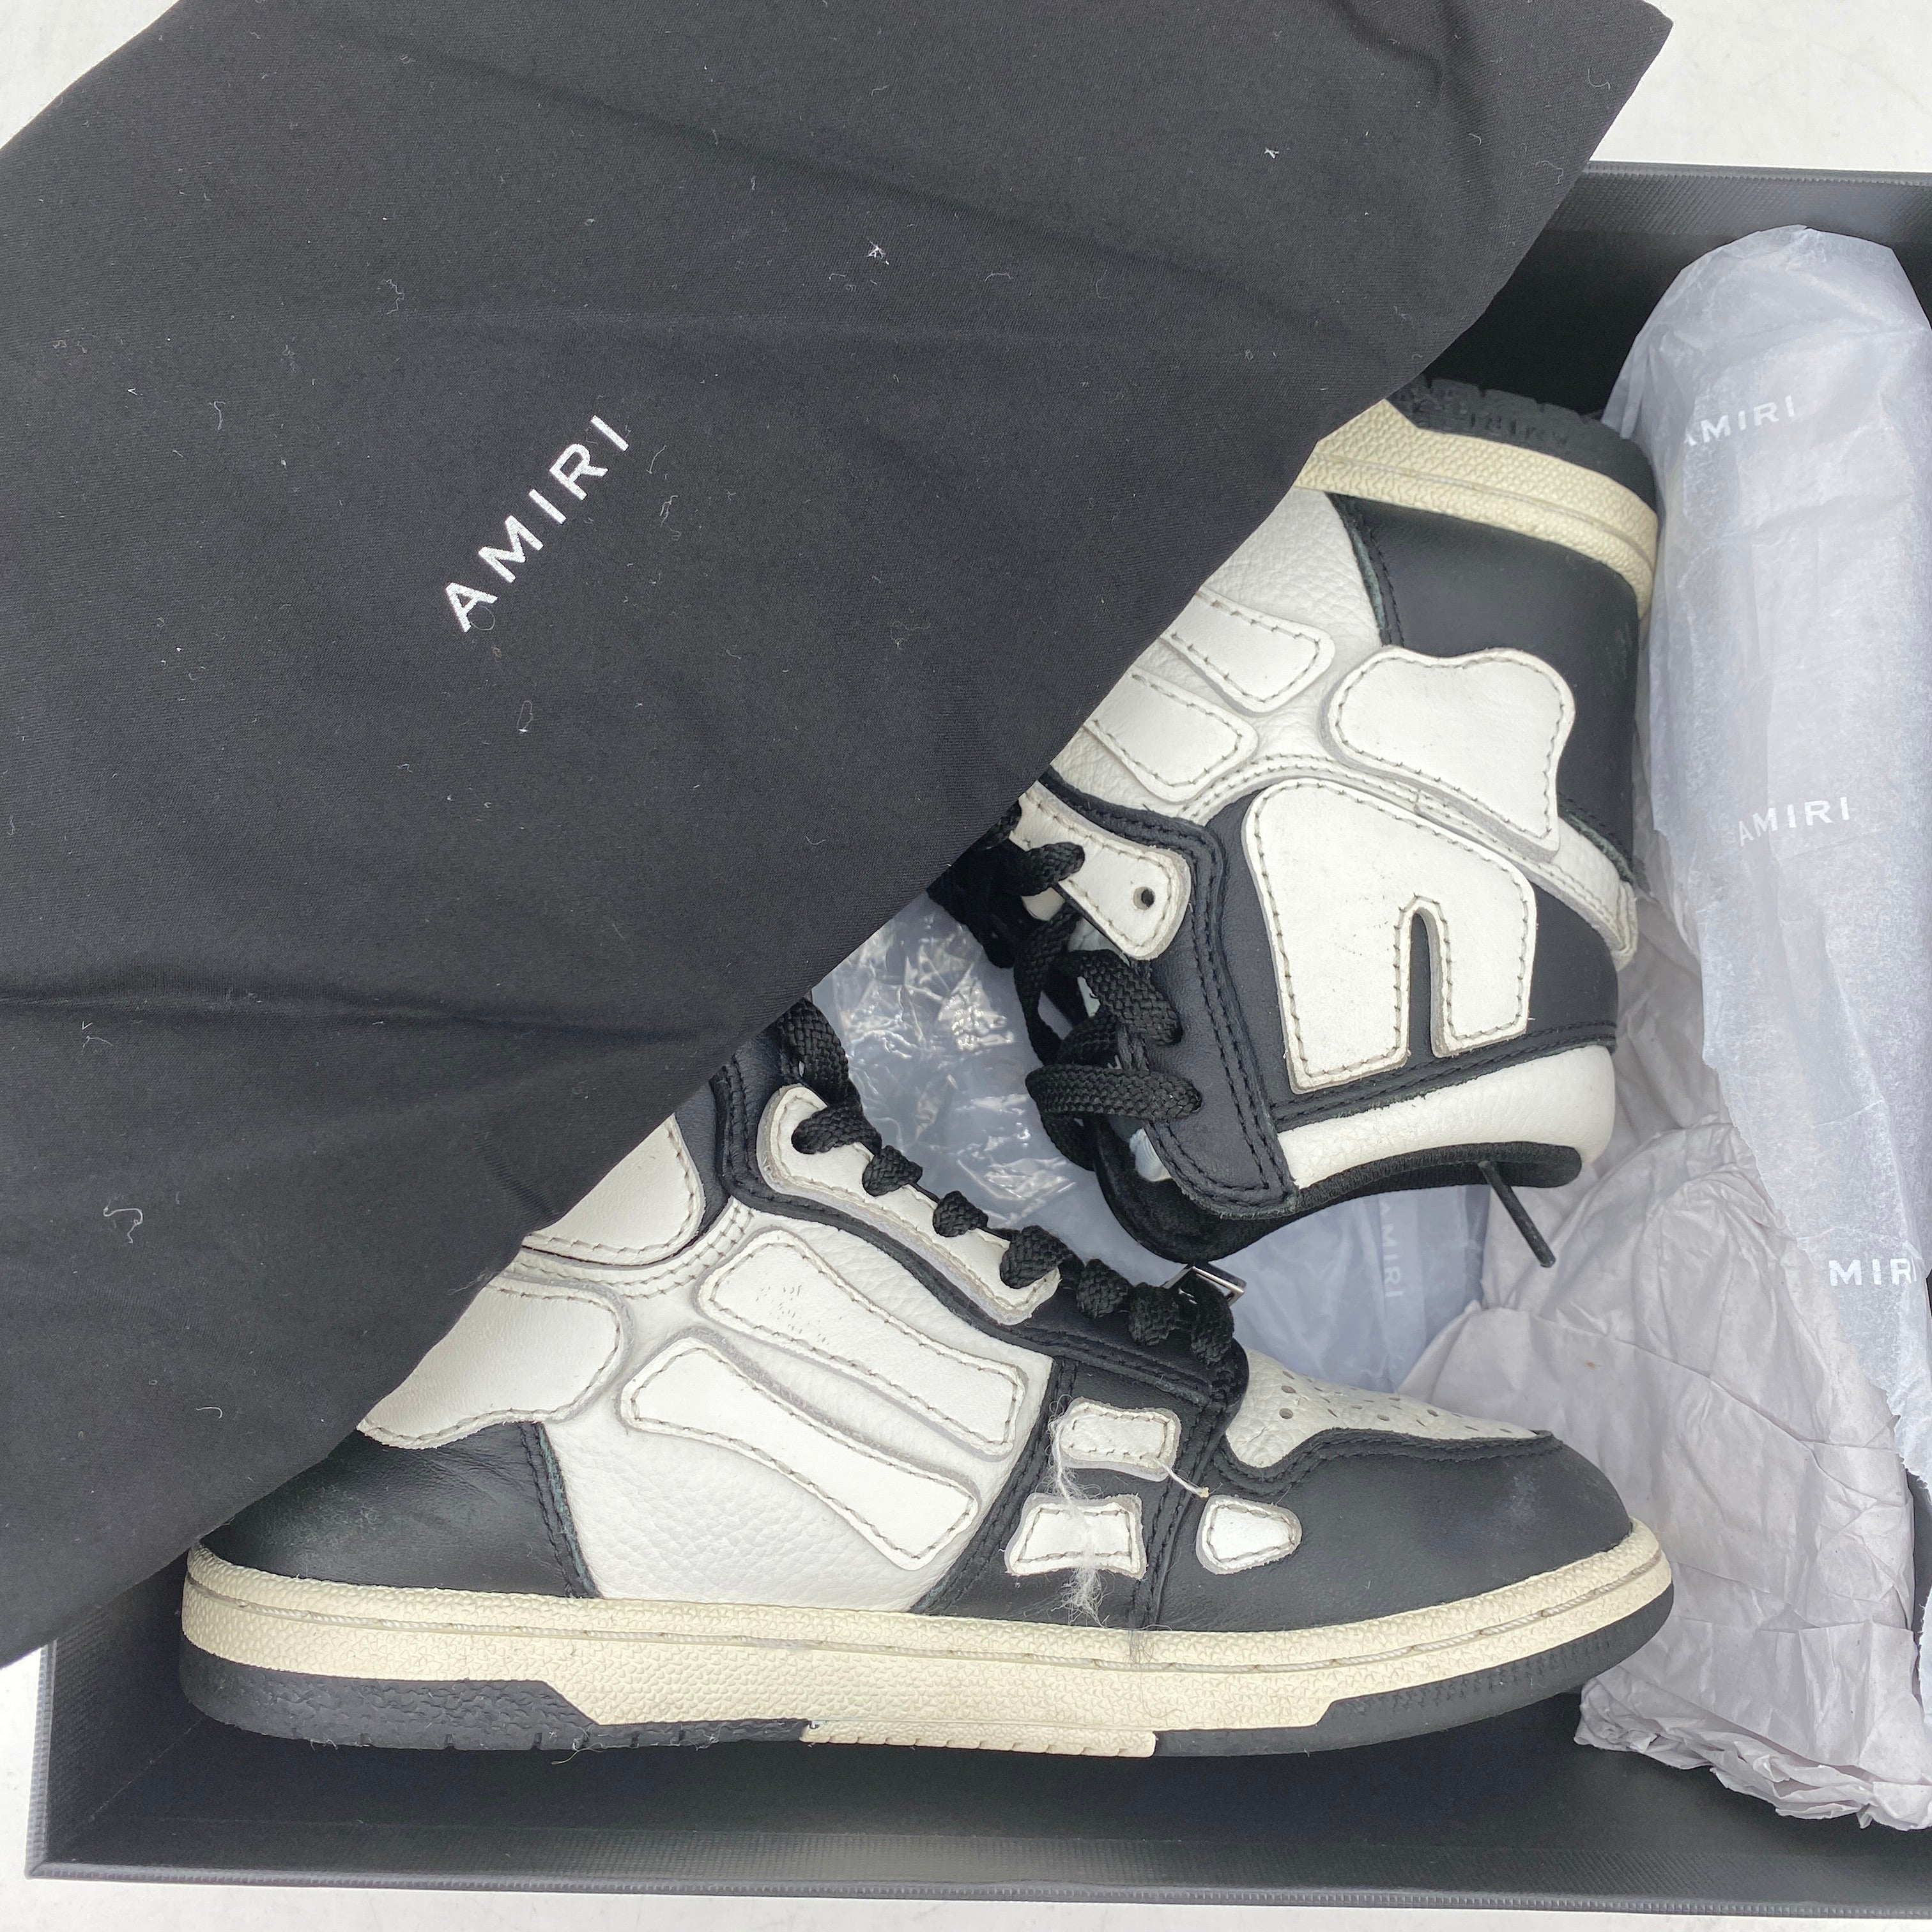 Amiri (GS) High Top &quot;Skeleton Black&quot;  Used Size